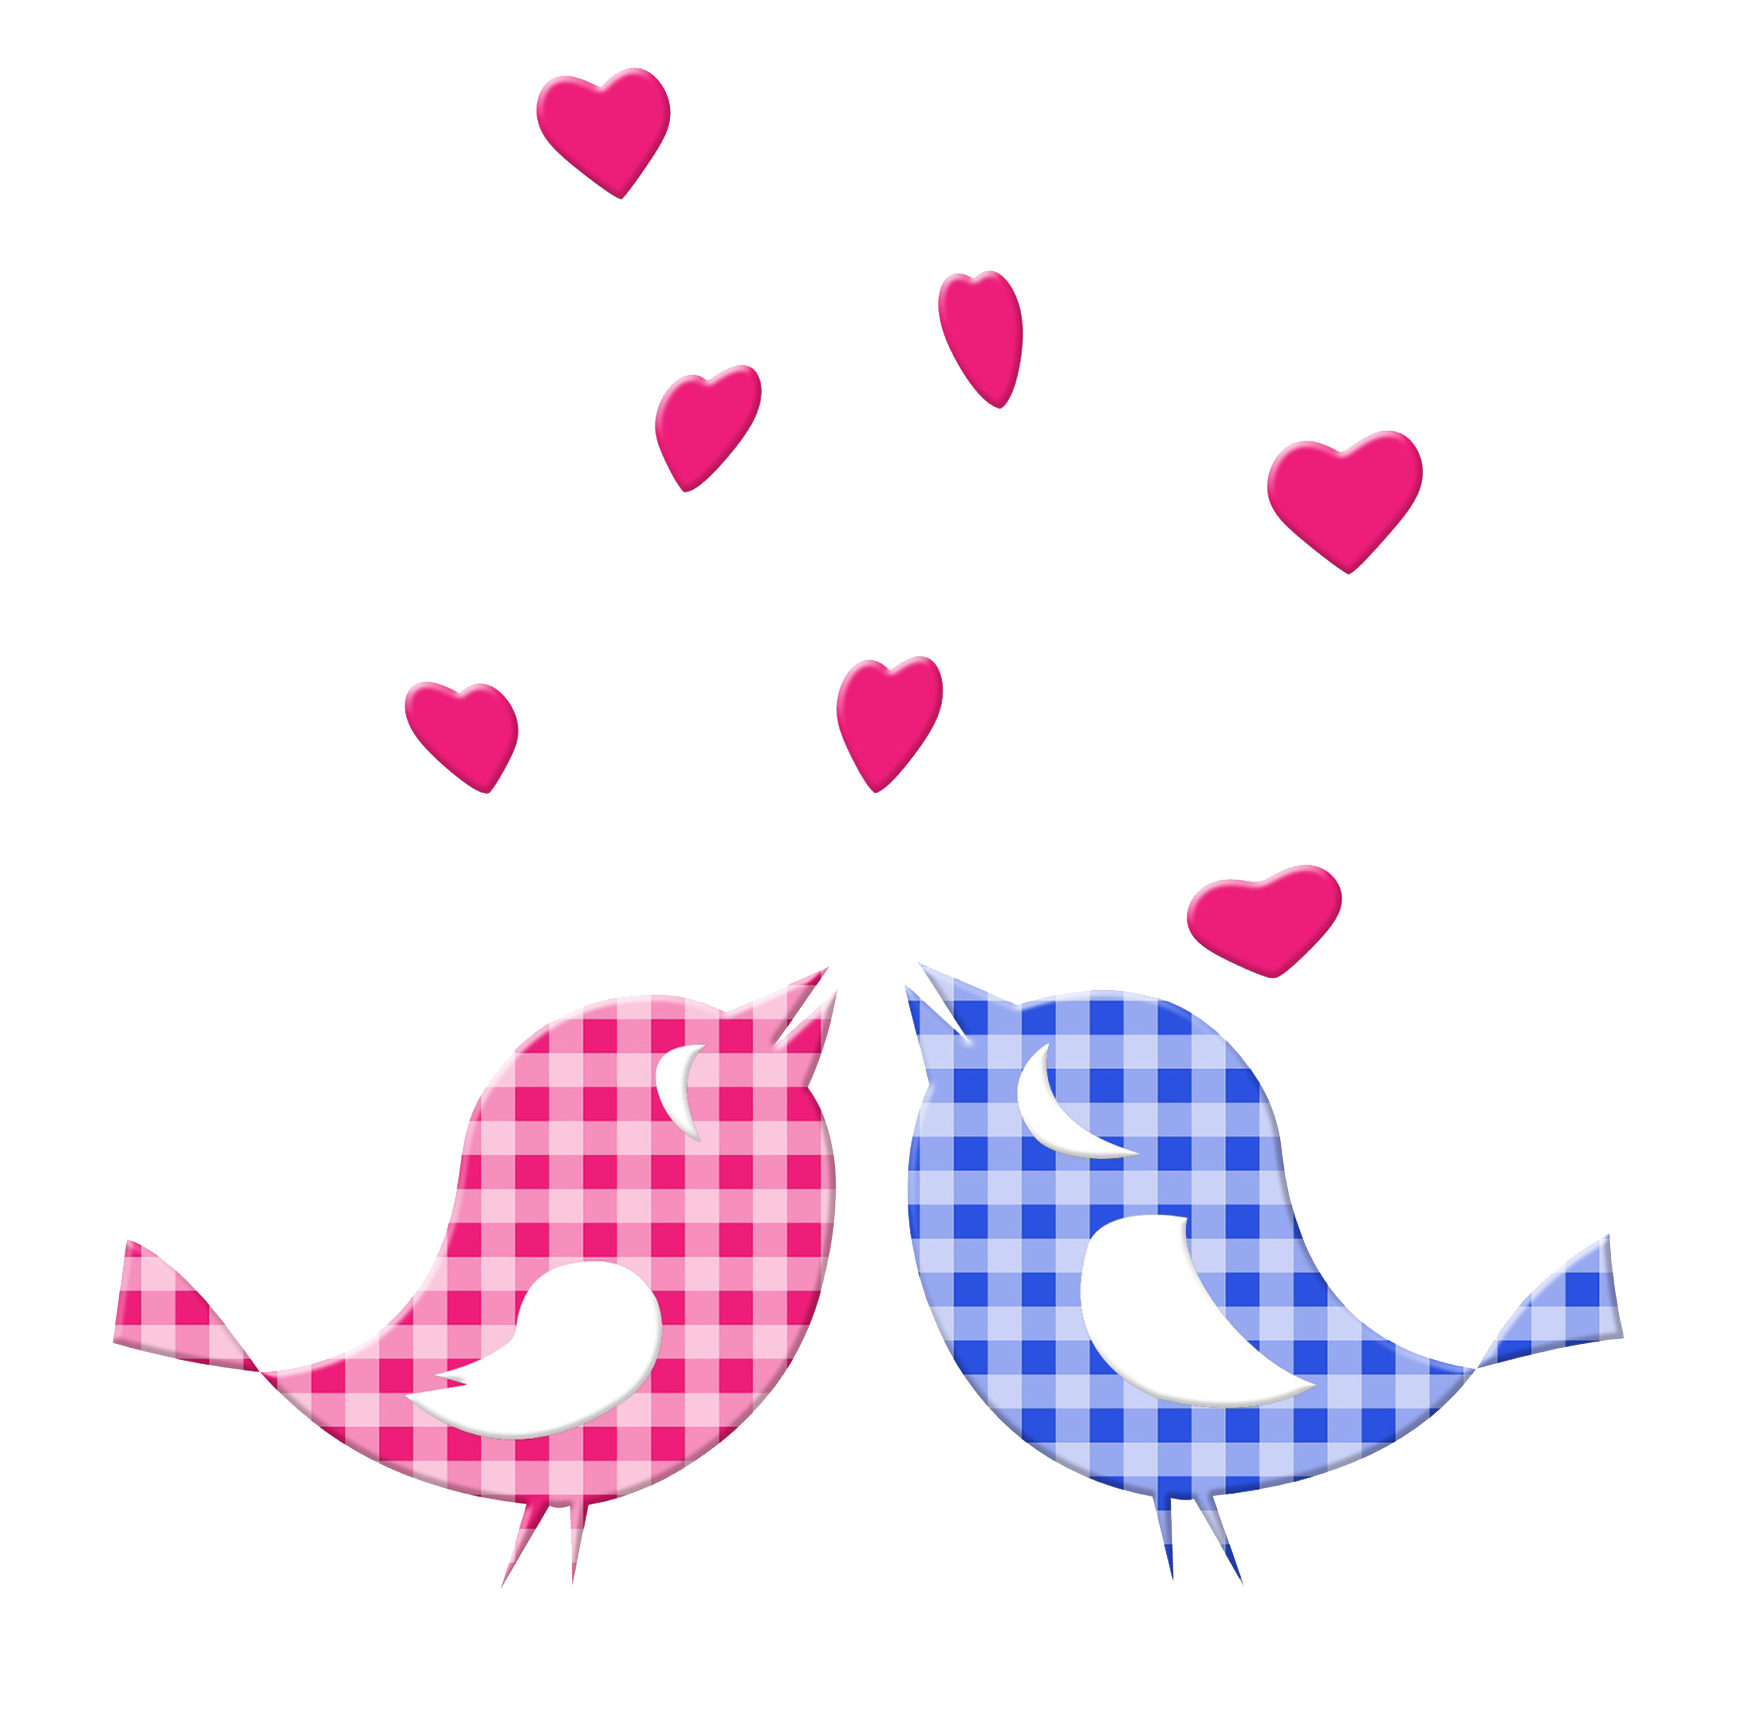 Two cute love birds and hearts